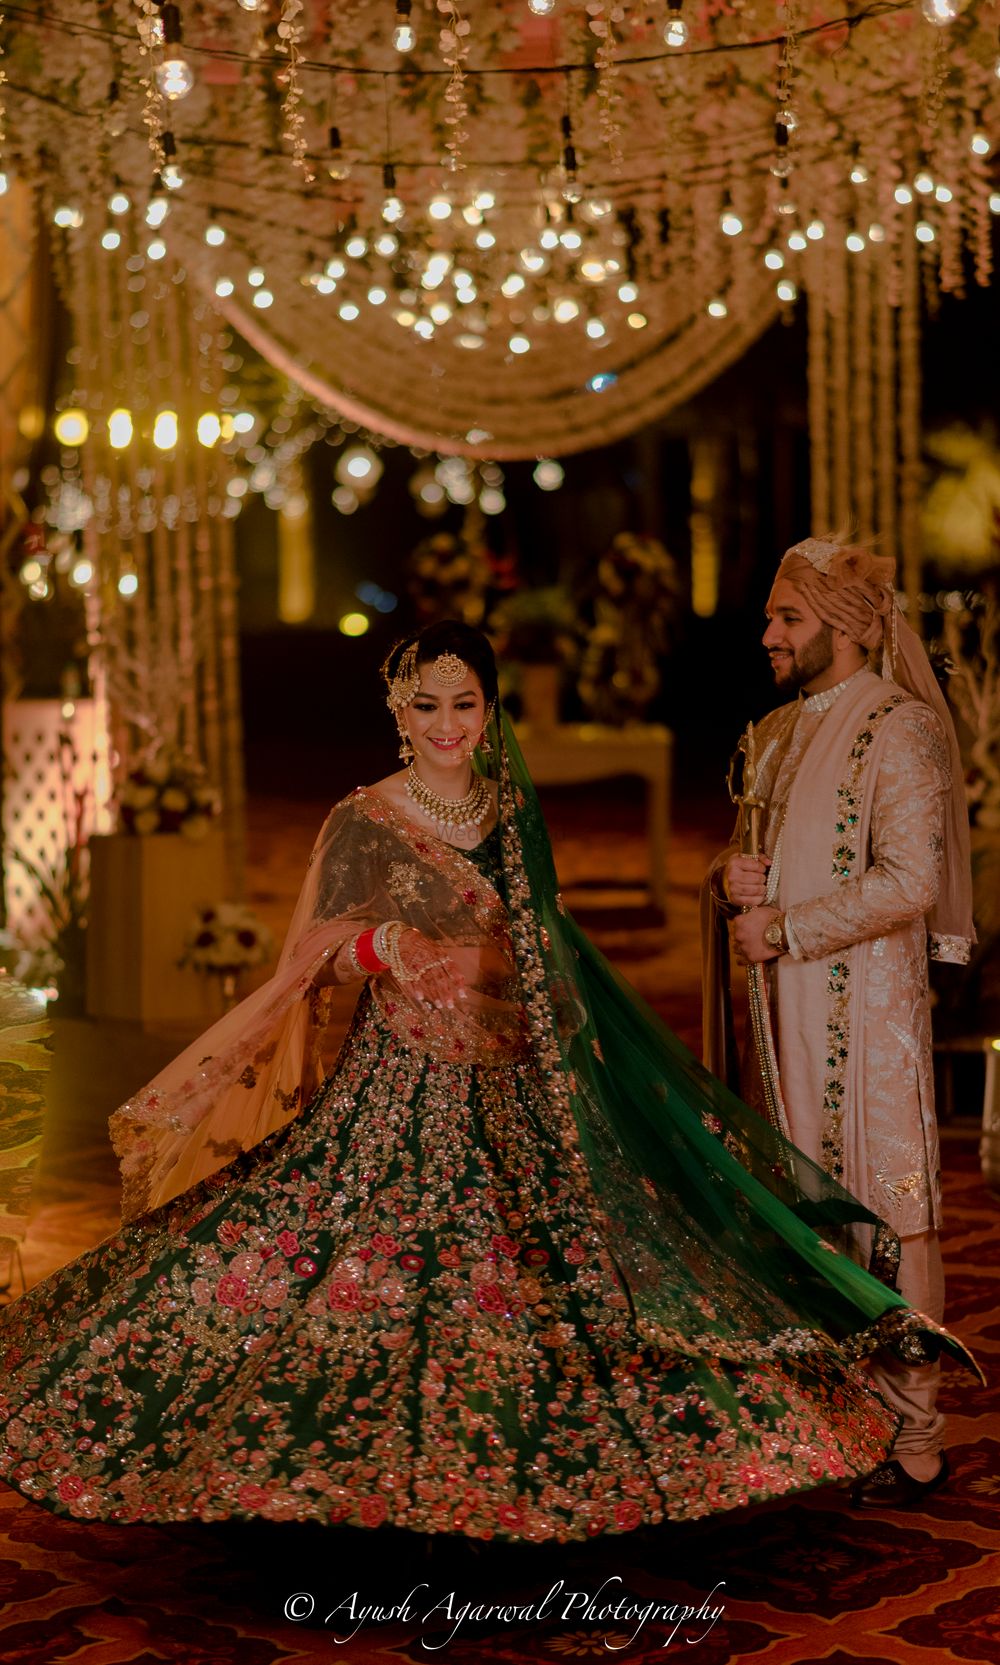 Photo of A bride in green lehenga twirling while the groom looks on